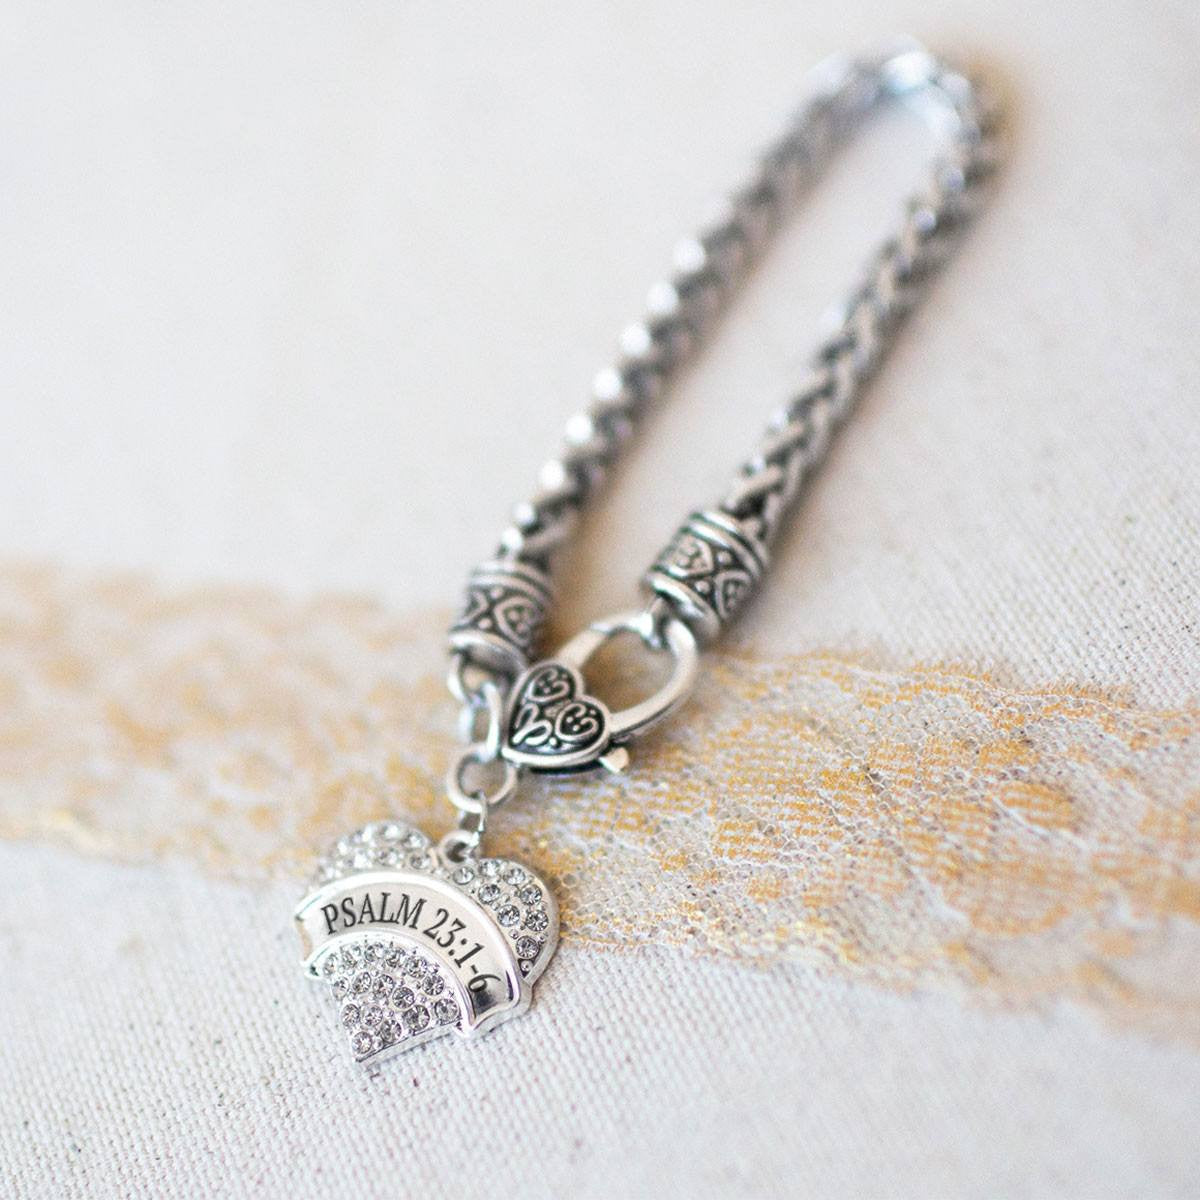 Psalm 23:16 Charm Jewelry Collection